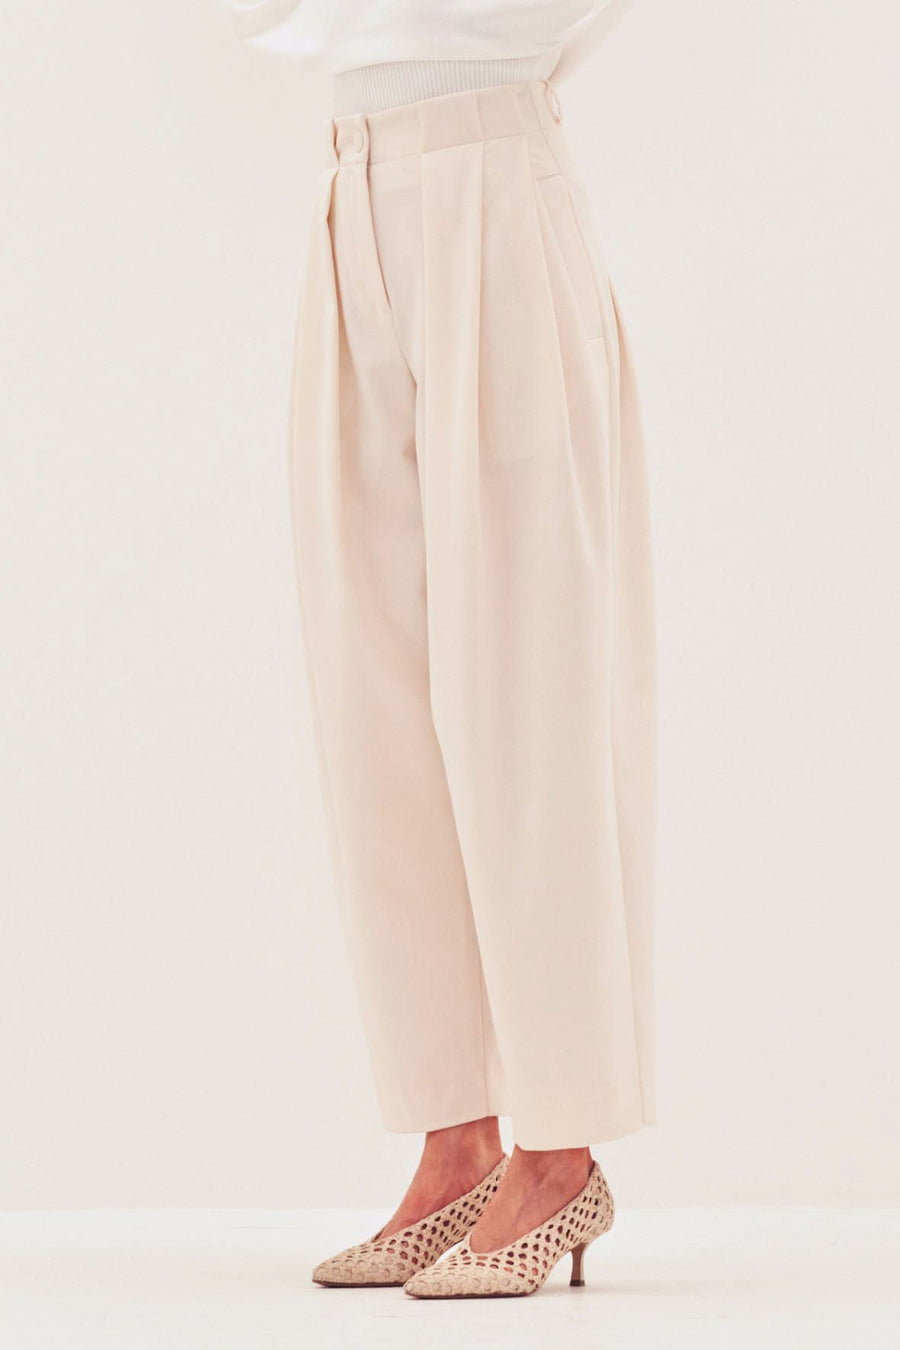 PALMER HARDING SOLO TROUSERS IN IVORY WOOL